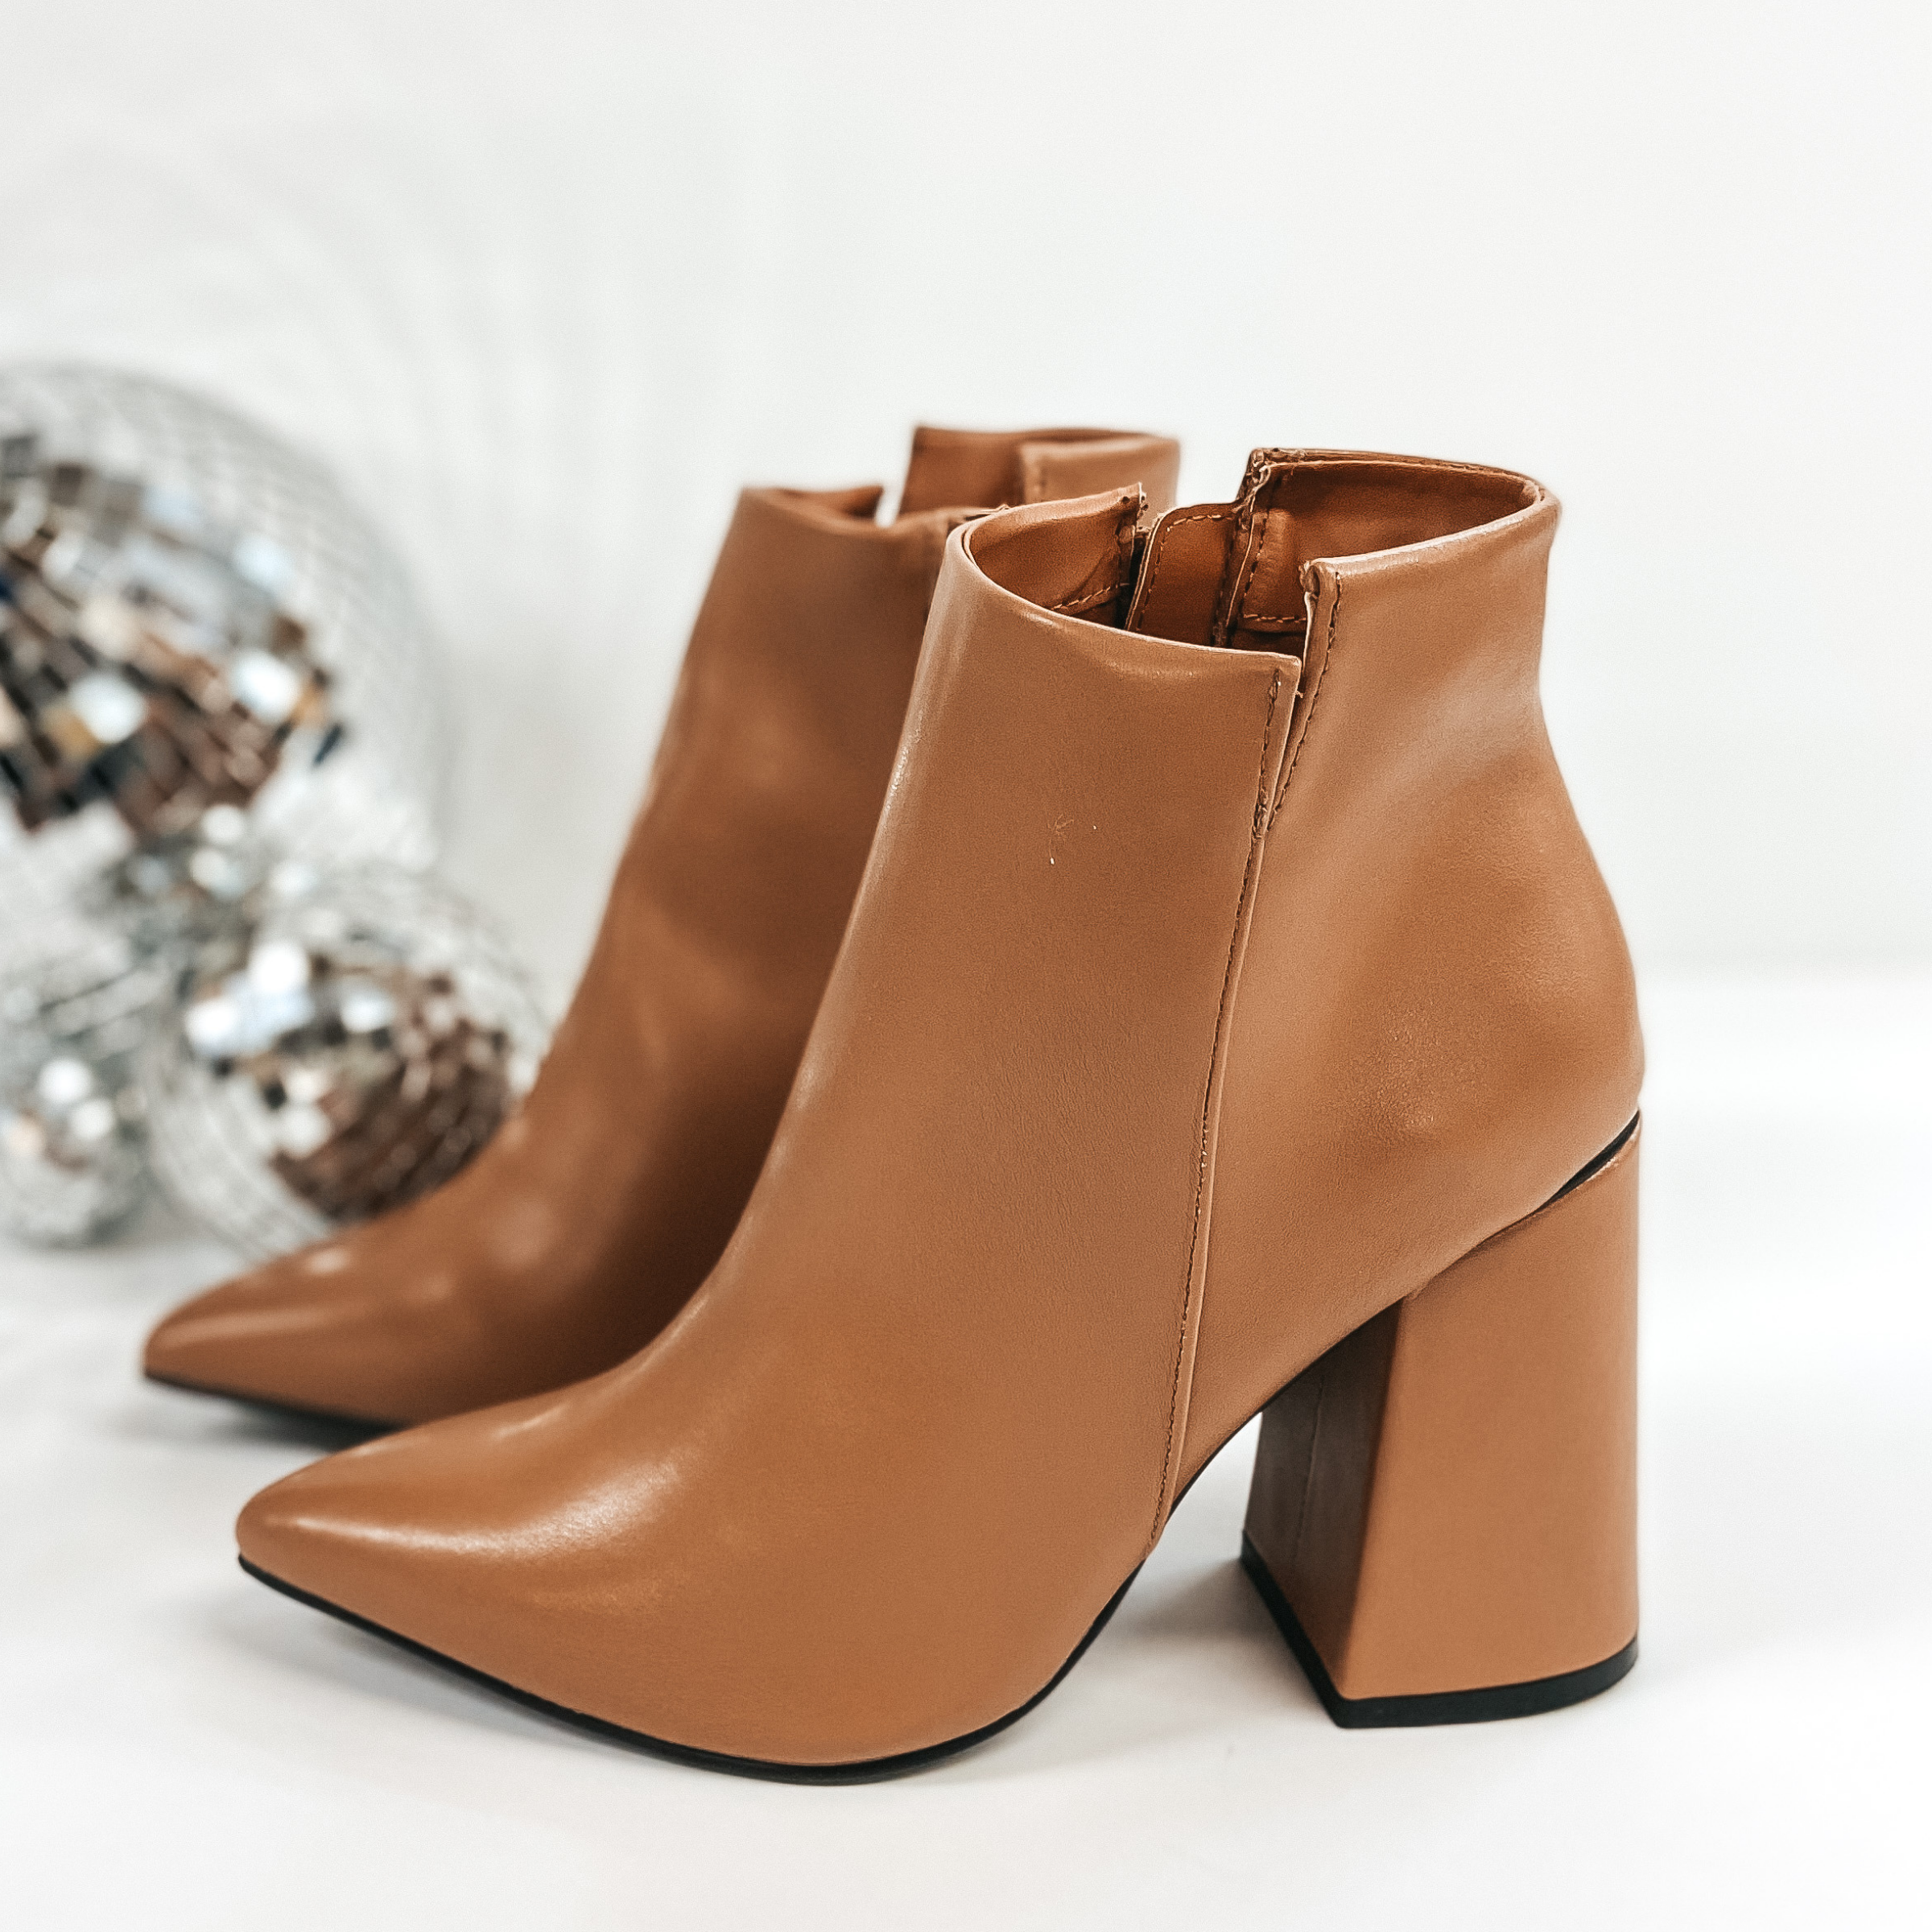 These booties have a high block heel with an asymmetrical ankle. The zip up booties have a pointed toe and are pictured on a white background with disco balls.